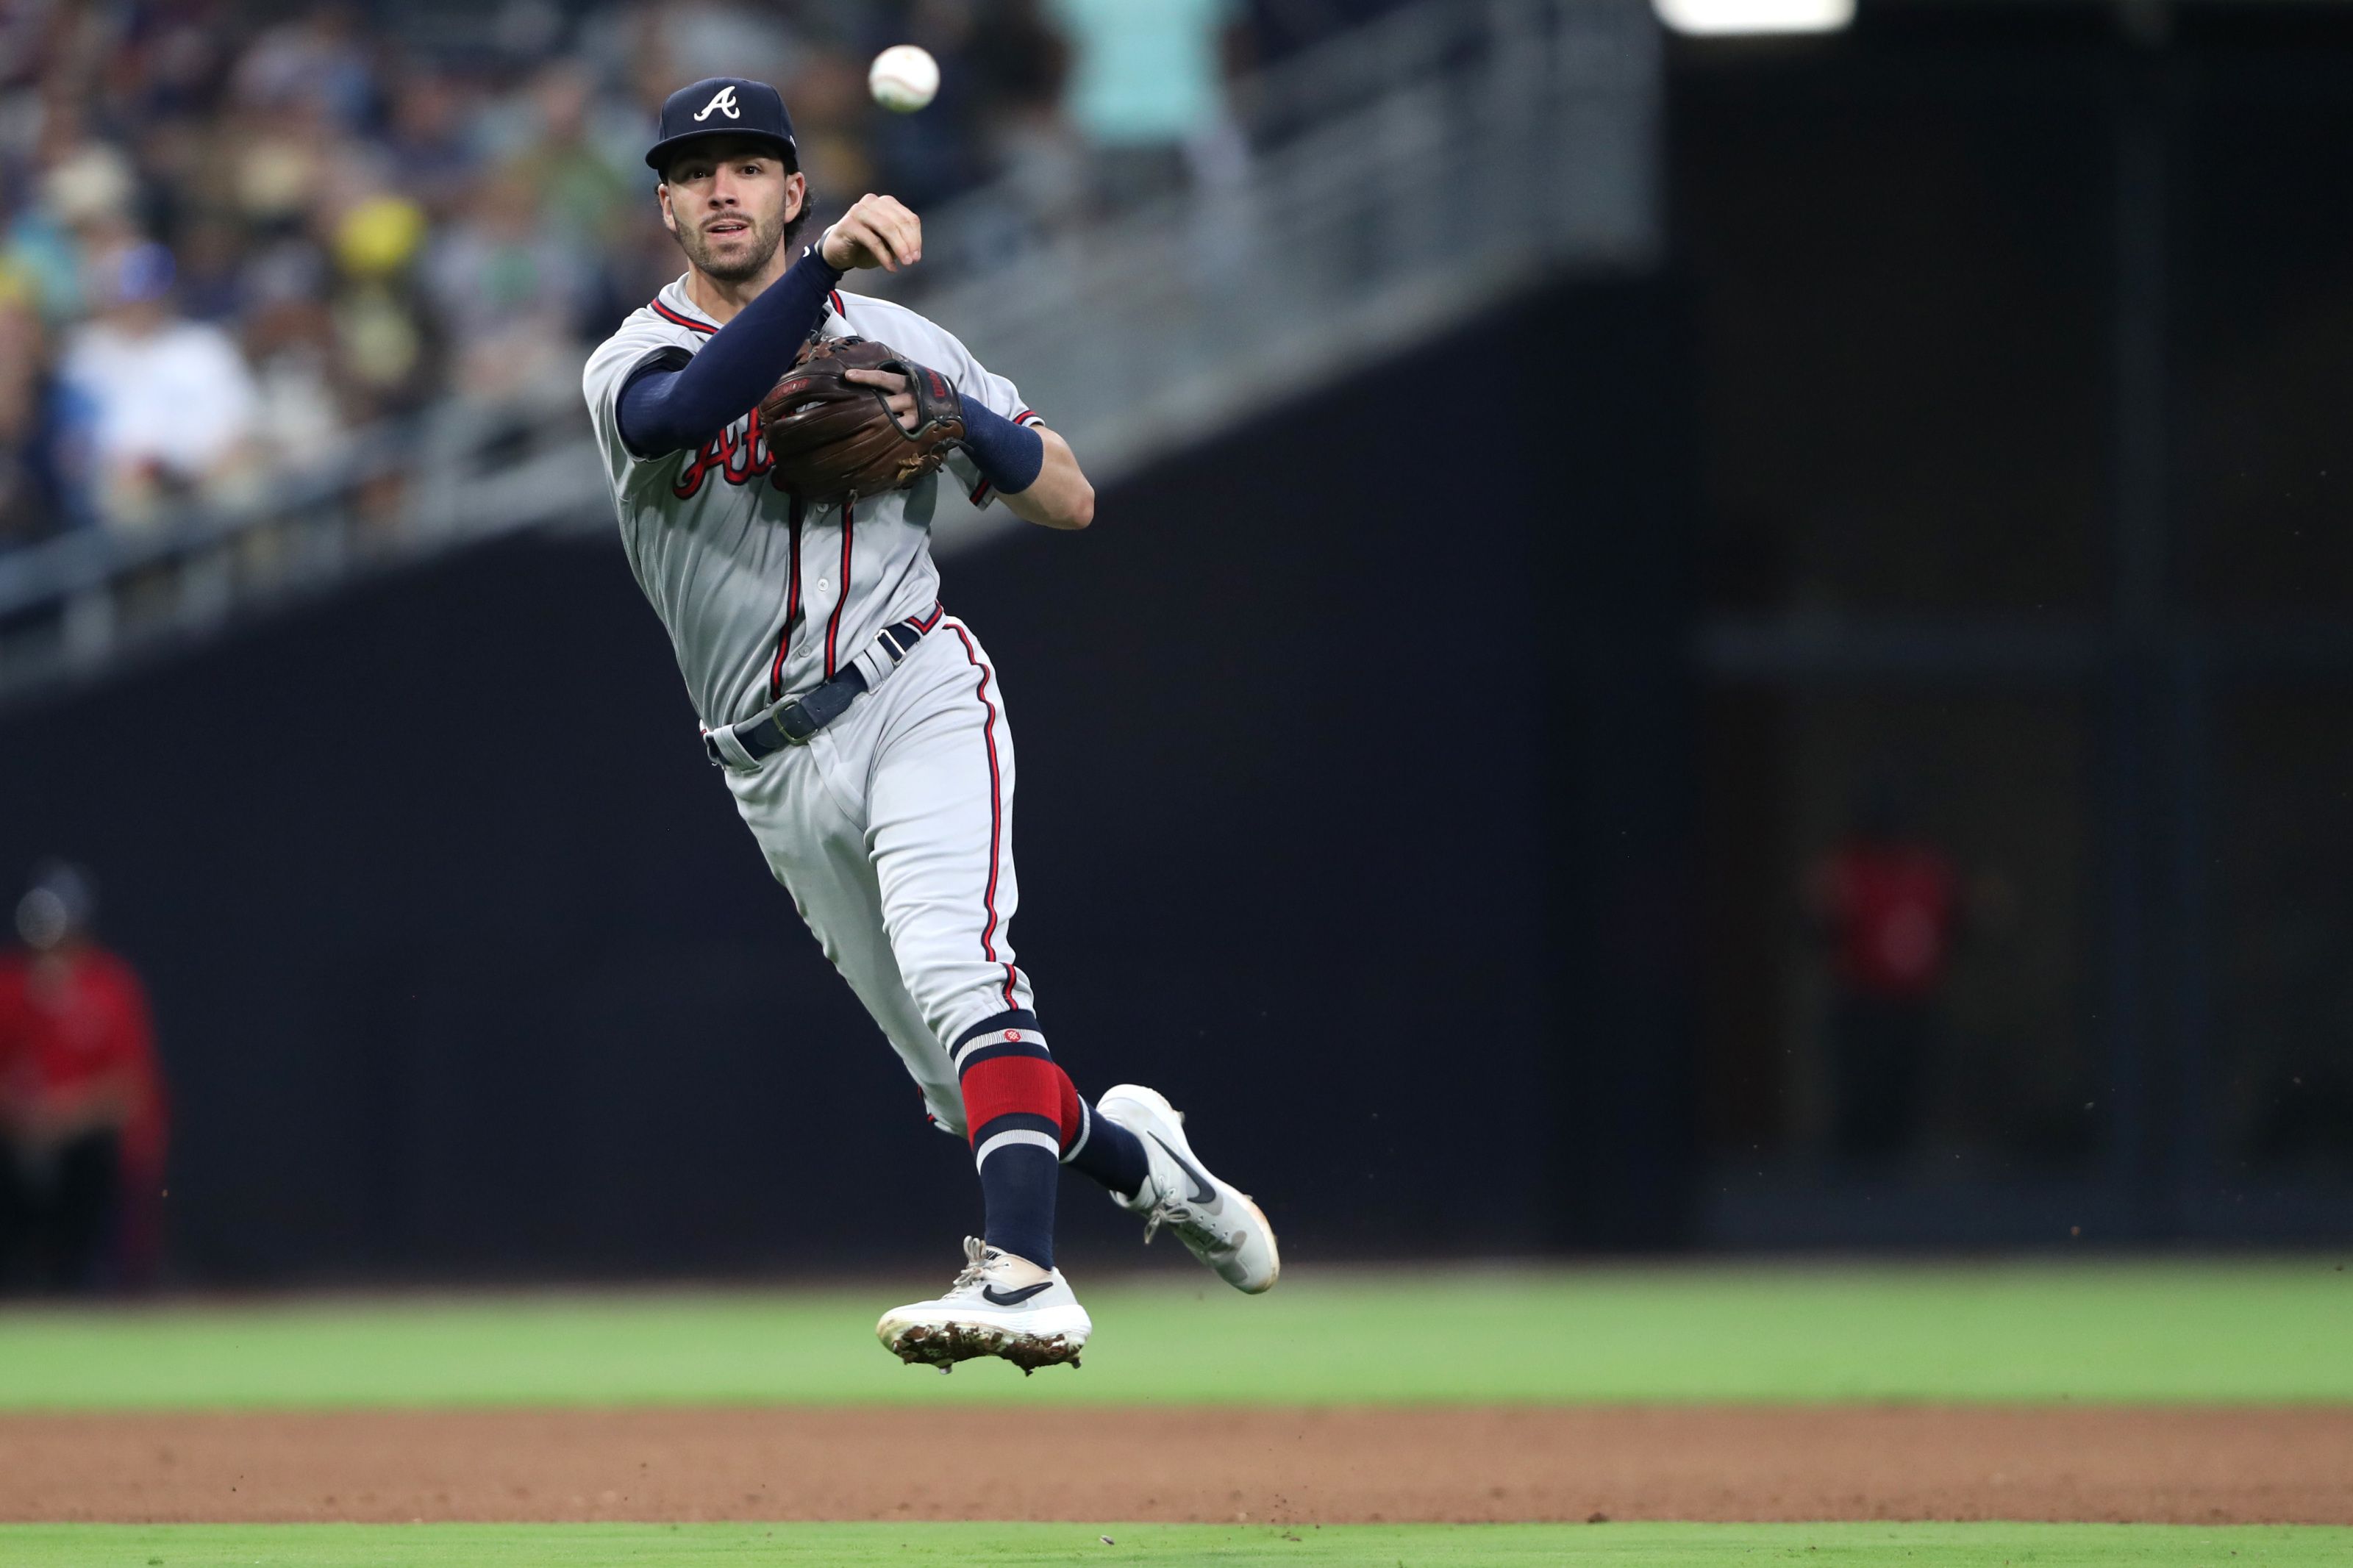 Atlanta Braves: Dansby Swanson update and what if his injury lingers